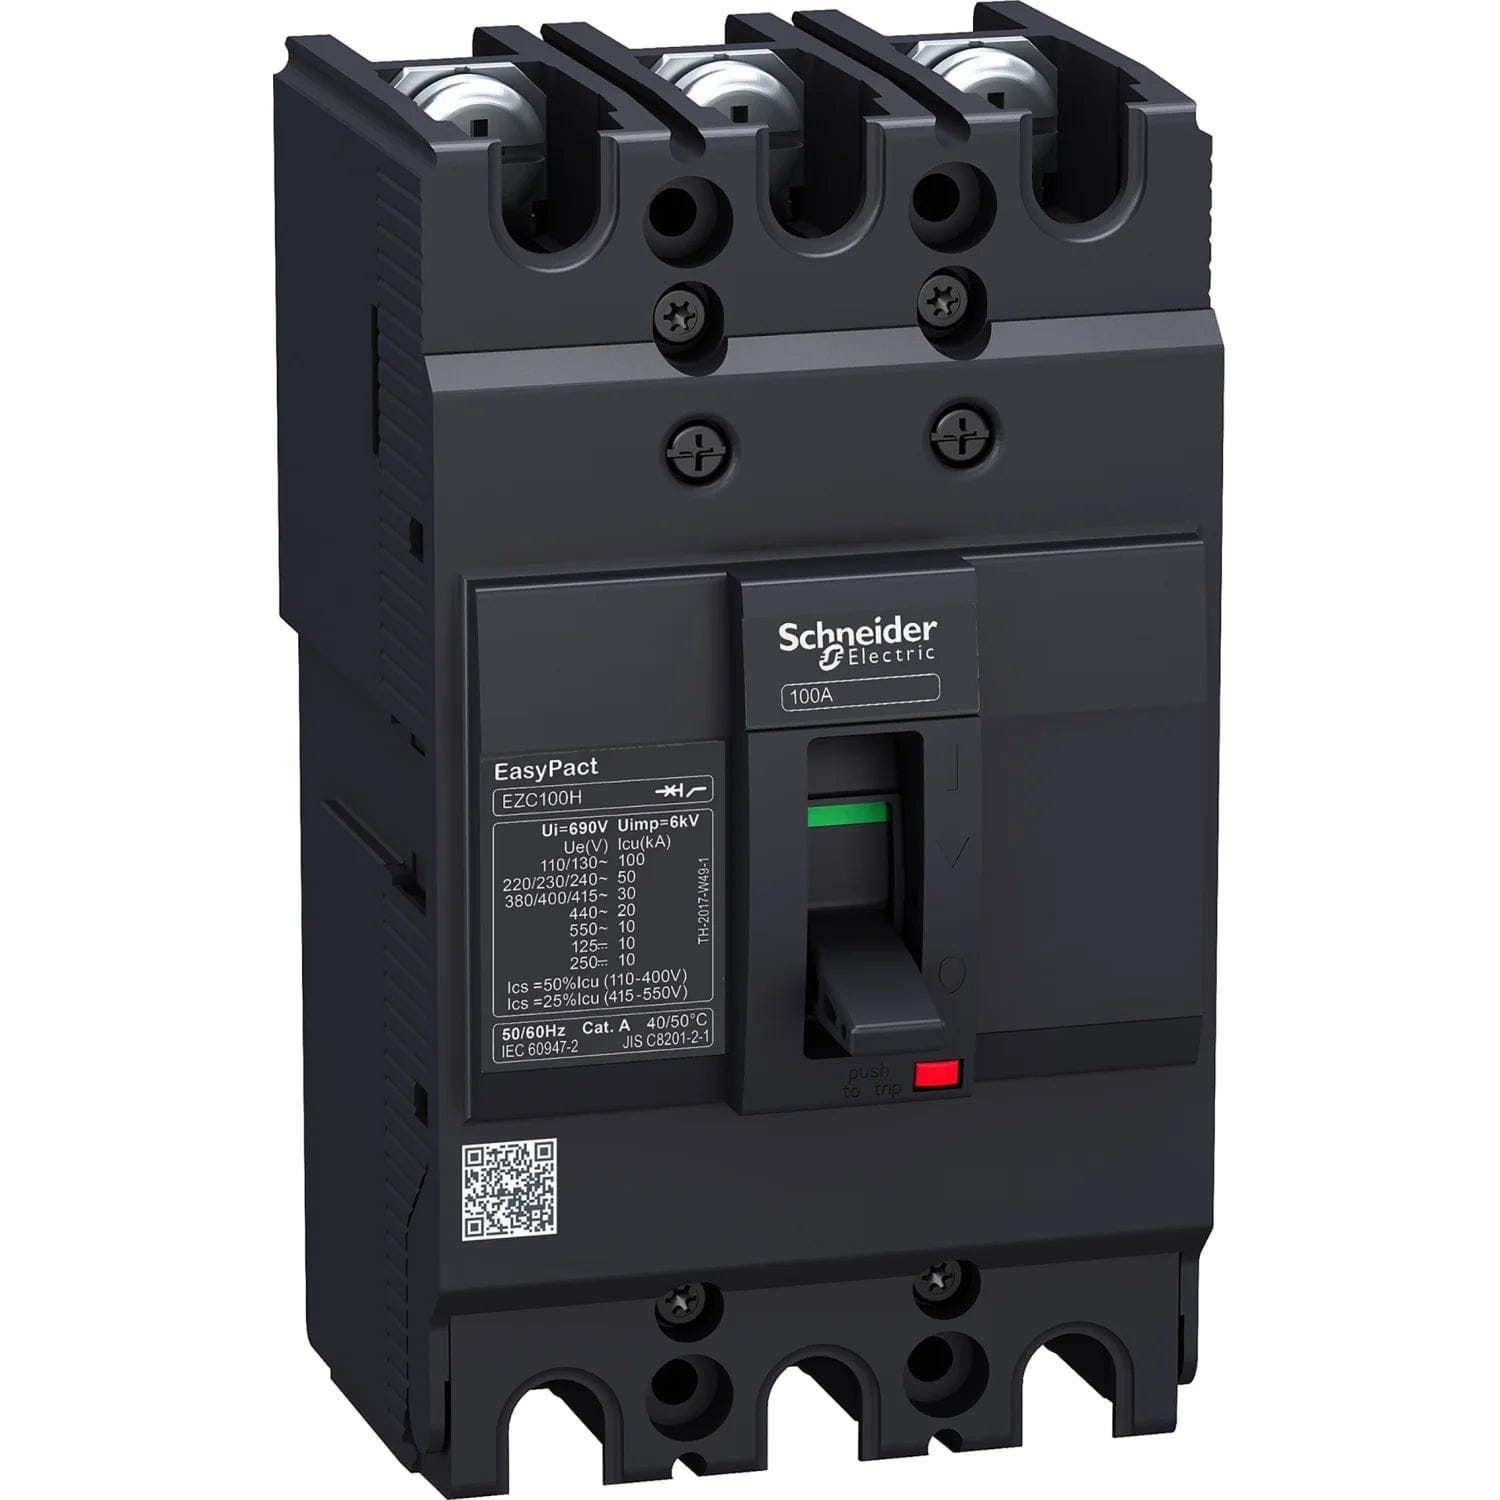 RR 3-Pole Molded Case Circuit Breaker - Buy Online for Reliable Circuit Protection at Supply Master Power Management & Protection Buy Tools hardware Building materials